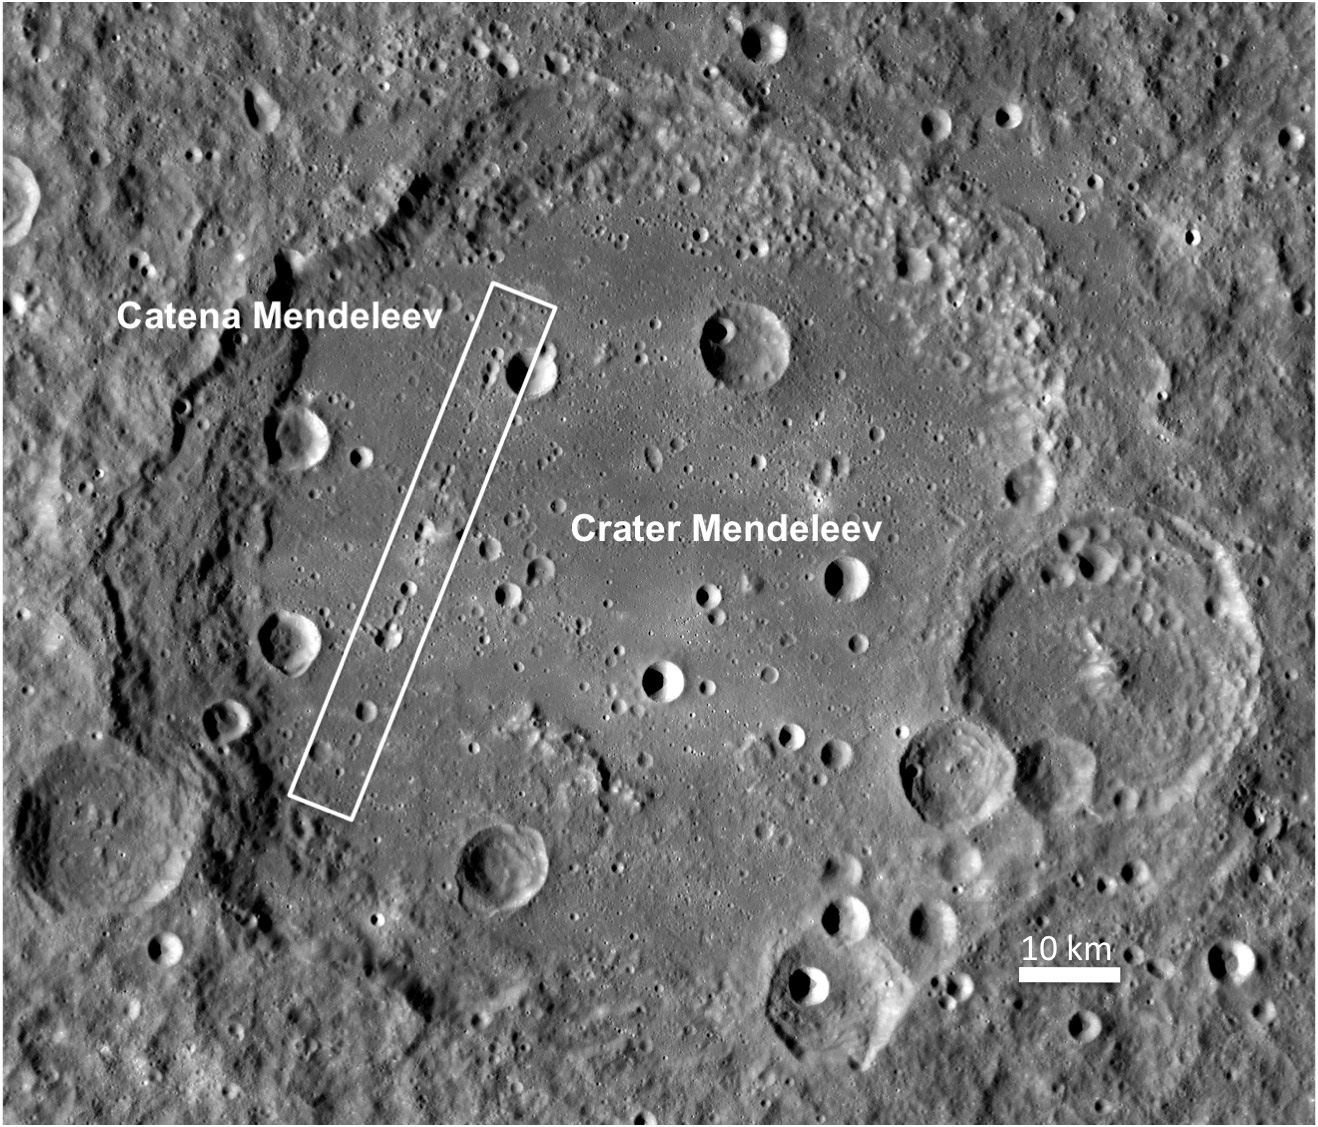 Impact crater full of impact craters on the Moon.